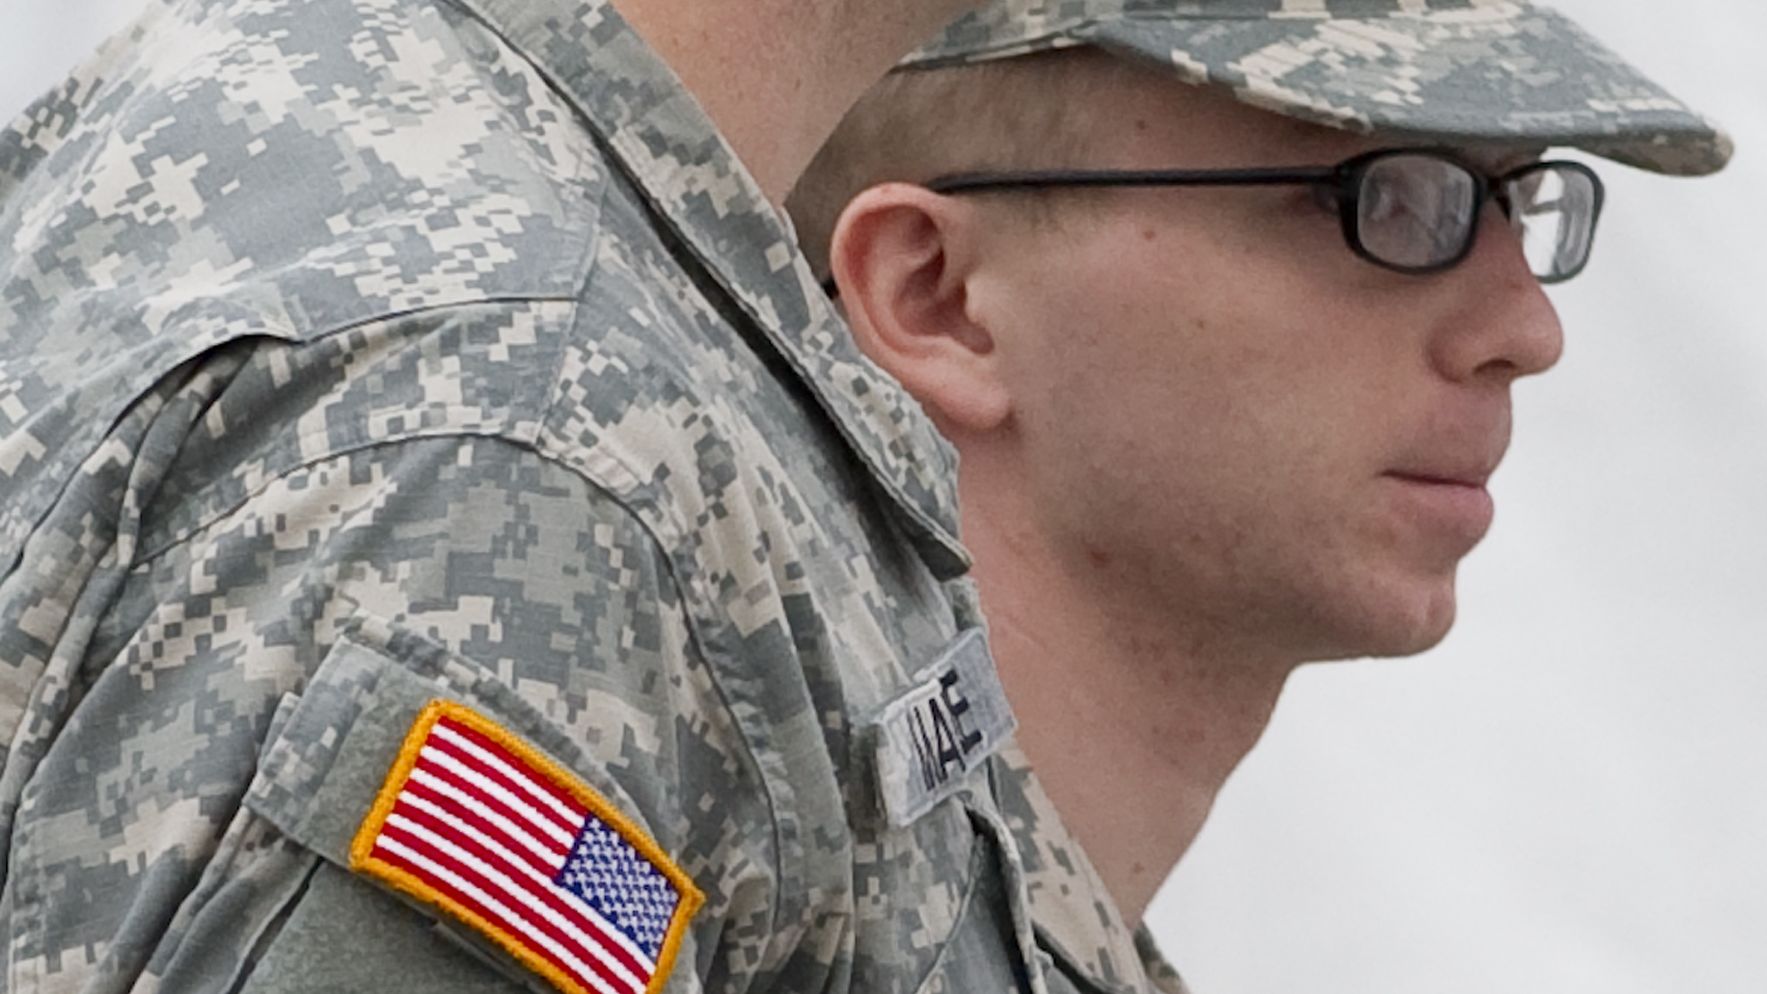 Pfc. Bradley Manning faces 22 charges after being accused of distributing hundreds of thousands of secret government documents to WikiLeaks.